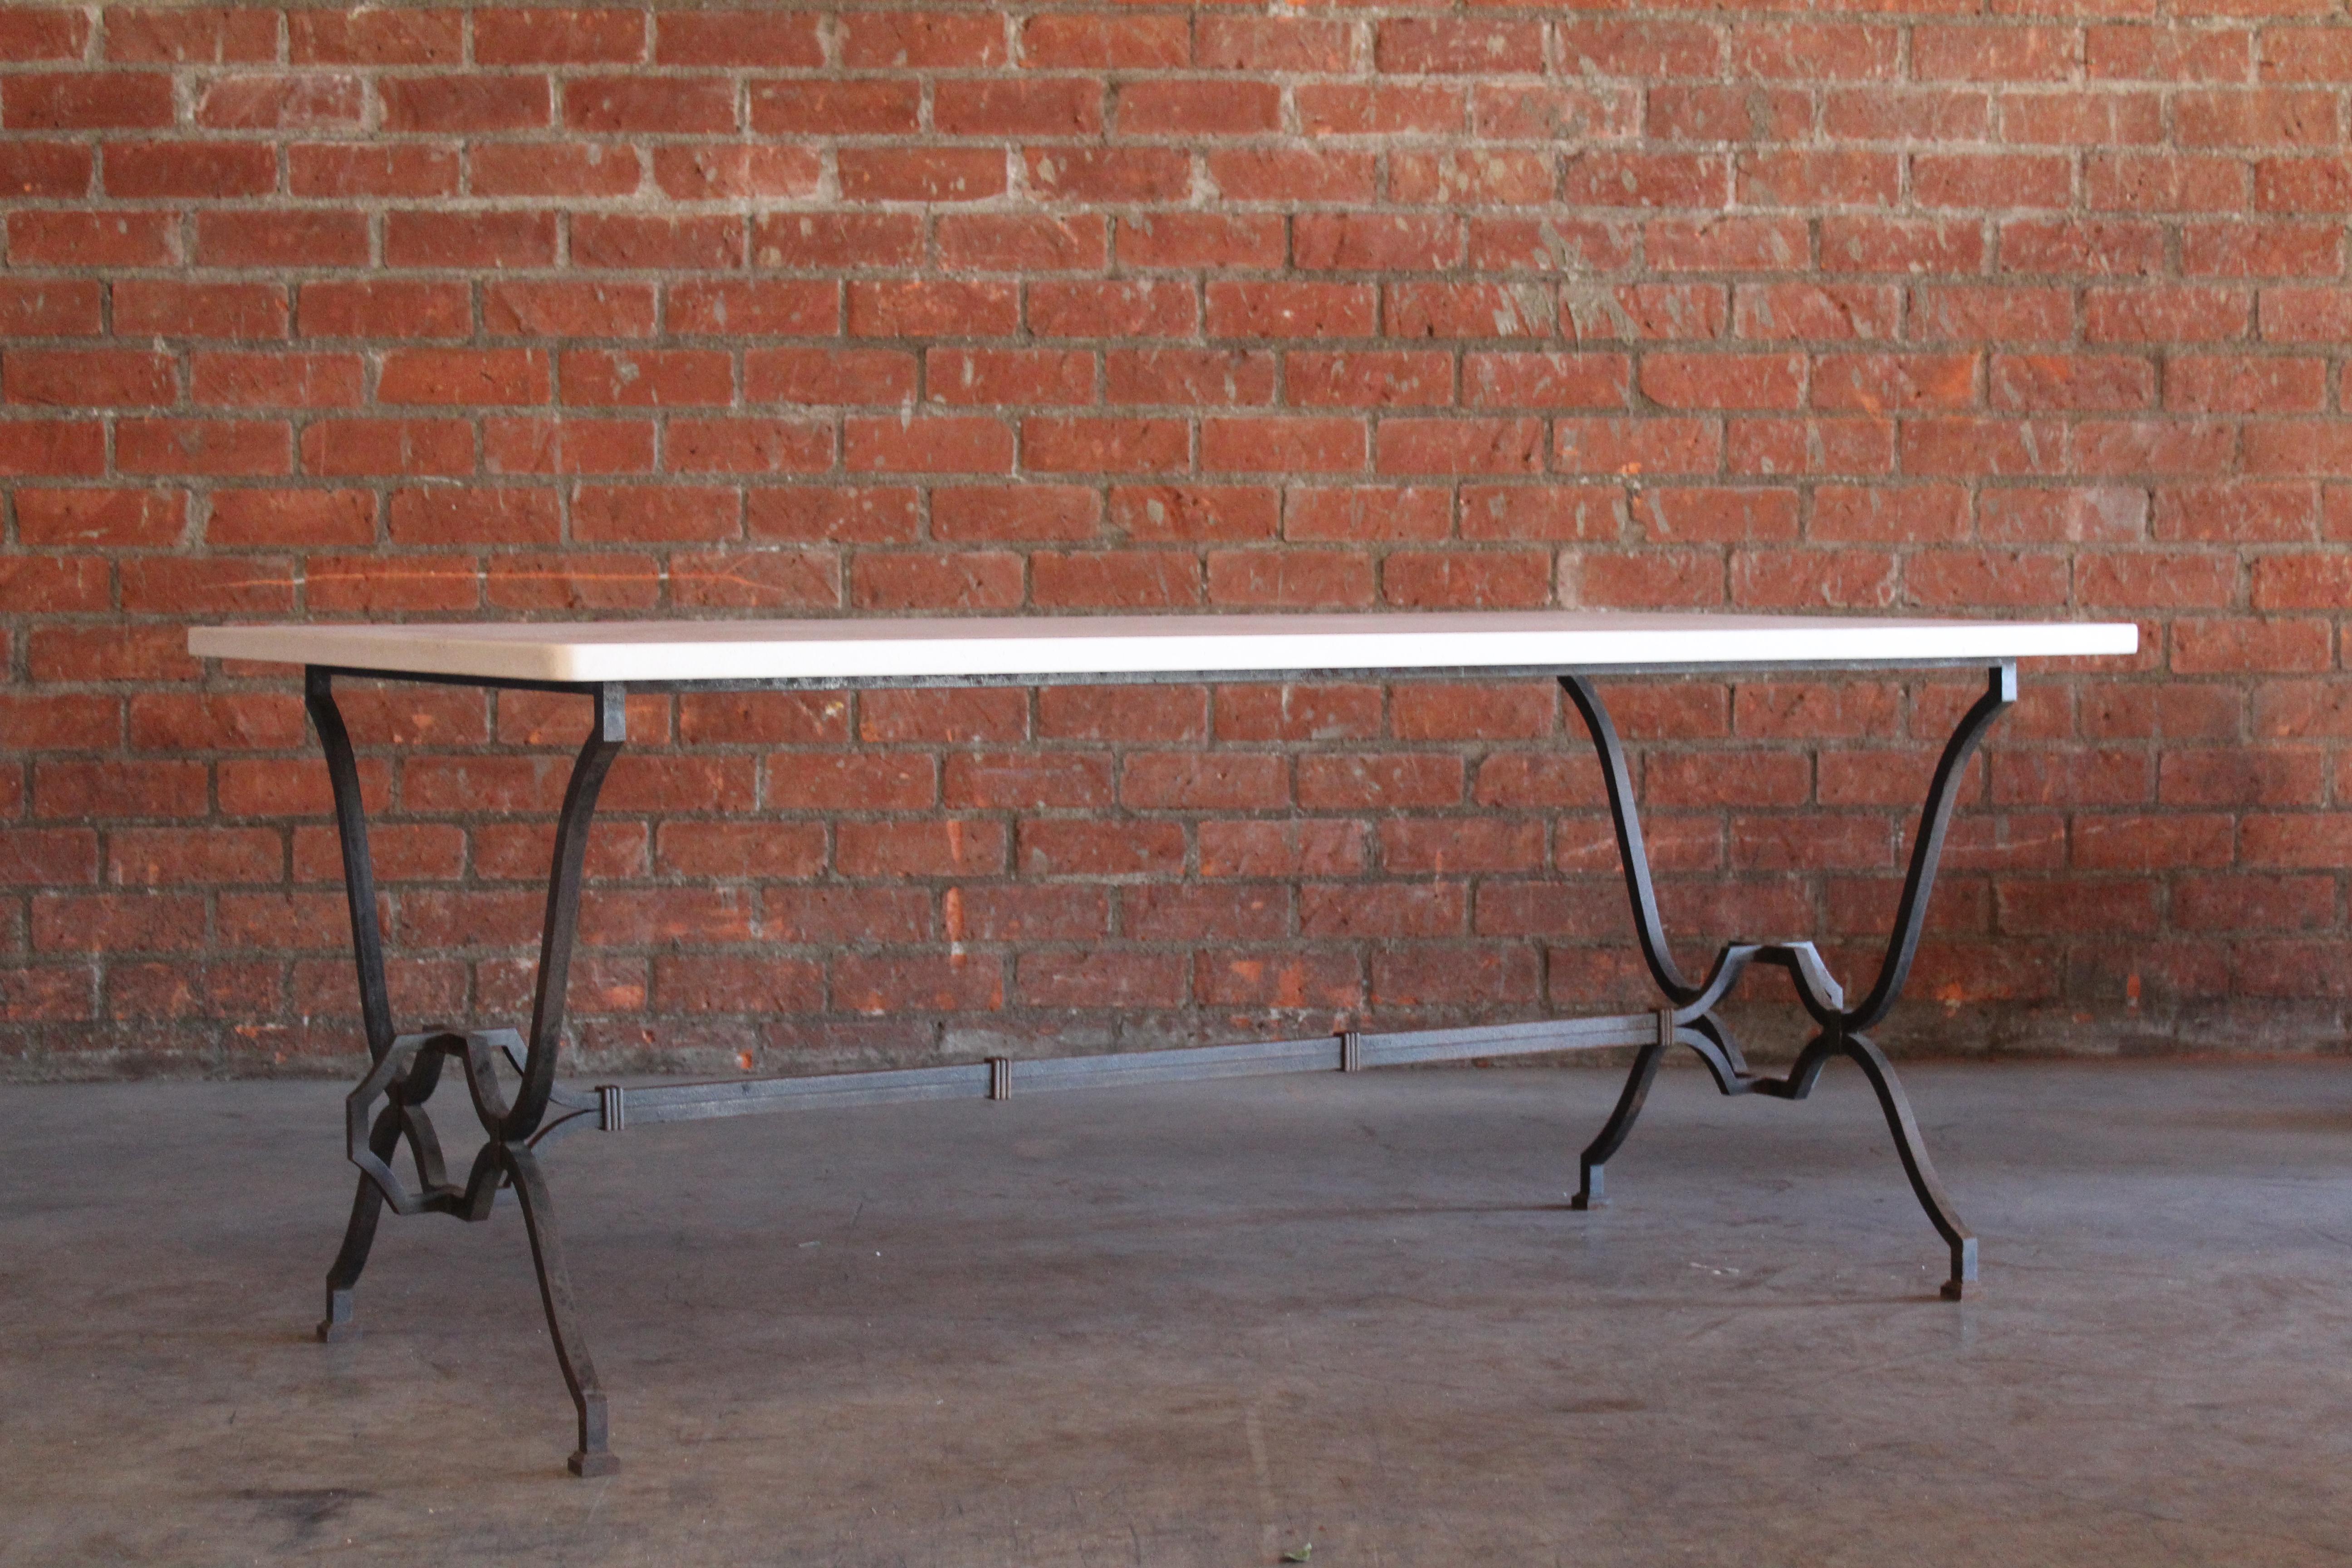 Art Deco 1940s French Wrought Iron and Limestone Table by Colette Gueden for René Prou For Sale